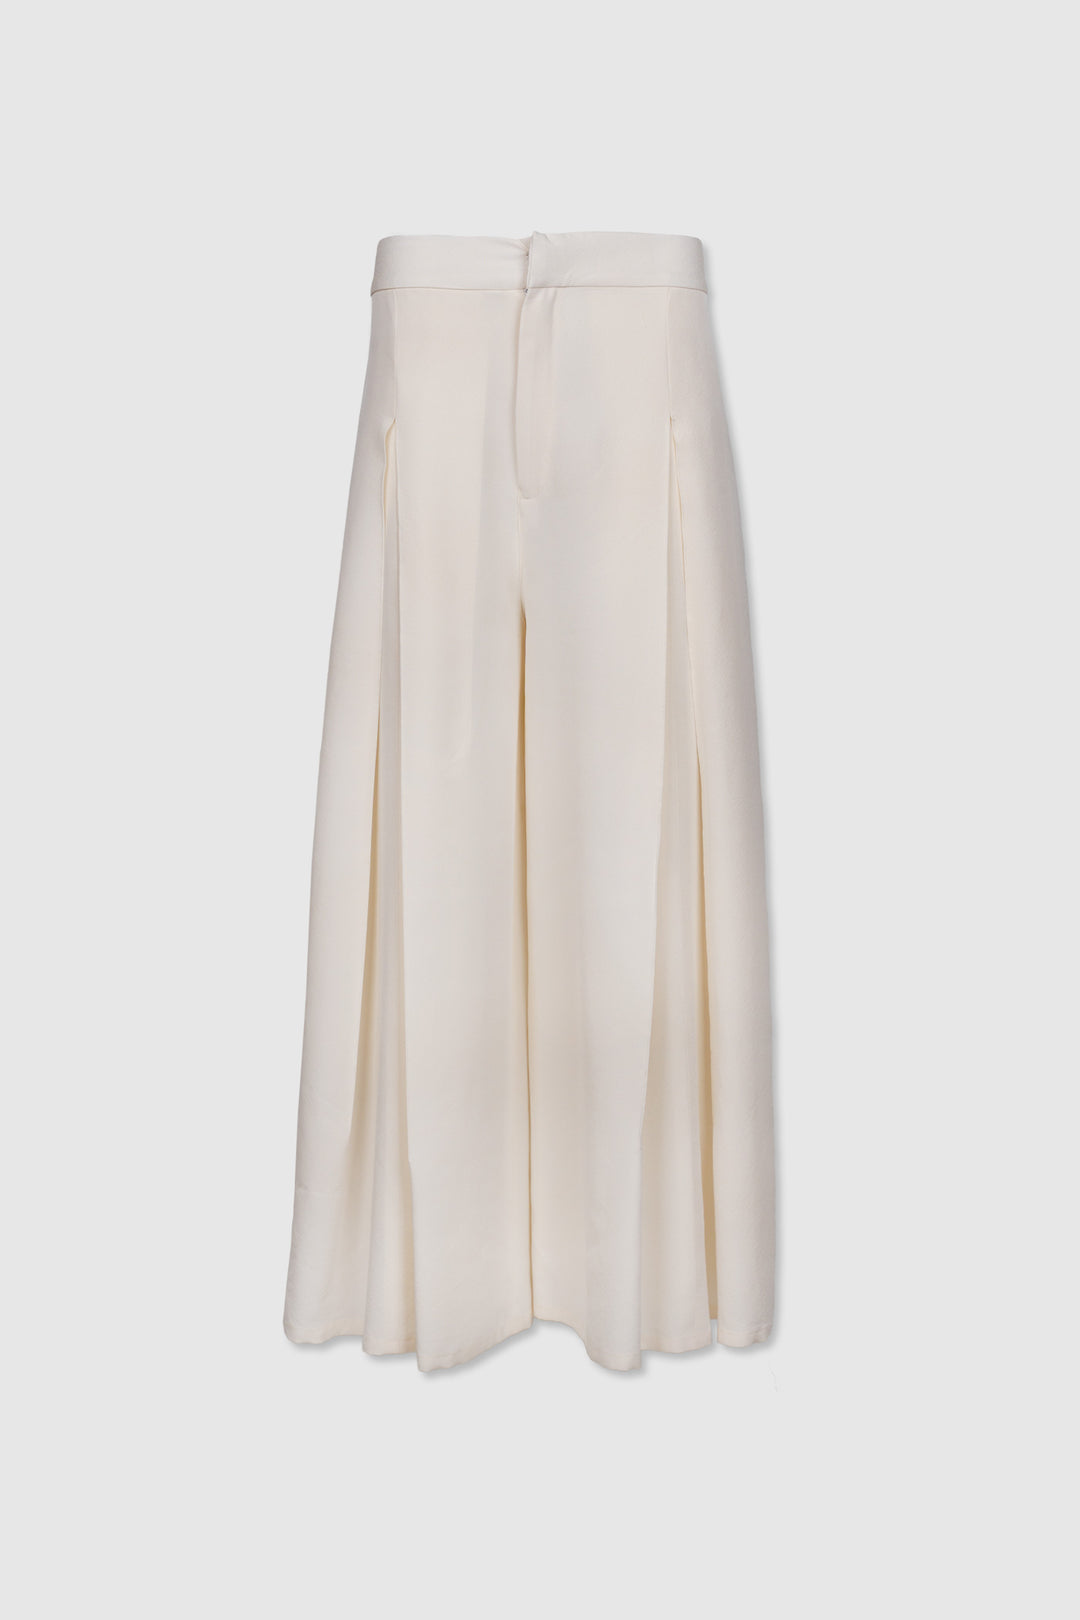 Contemporary Off-White with Black Side Details Silk Pants